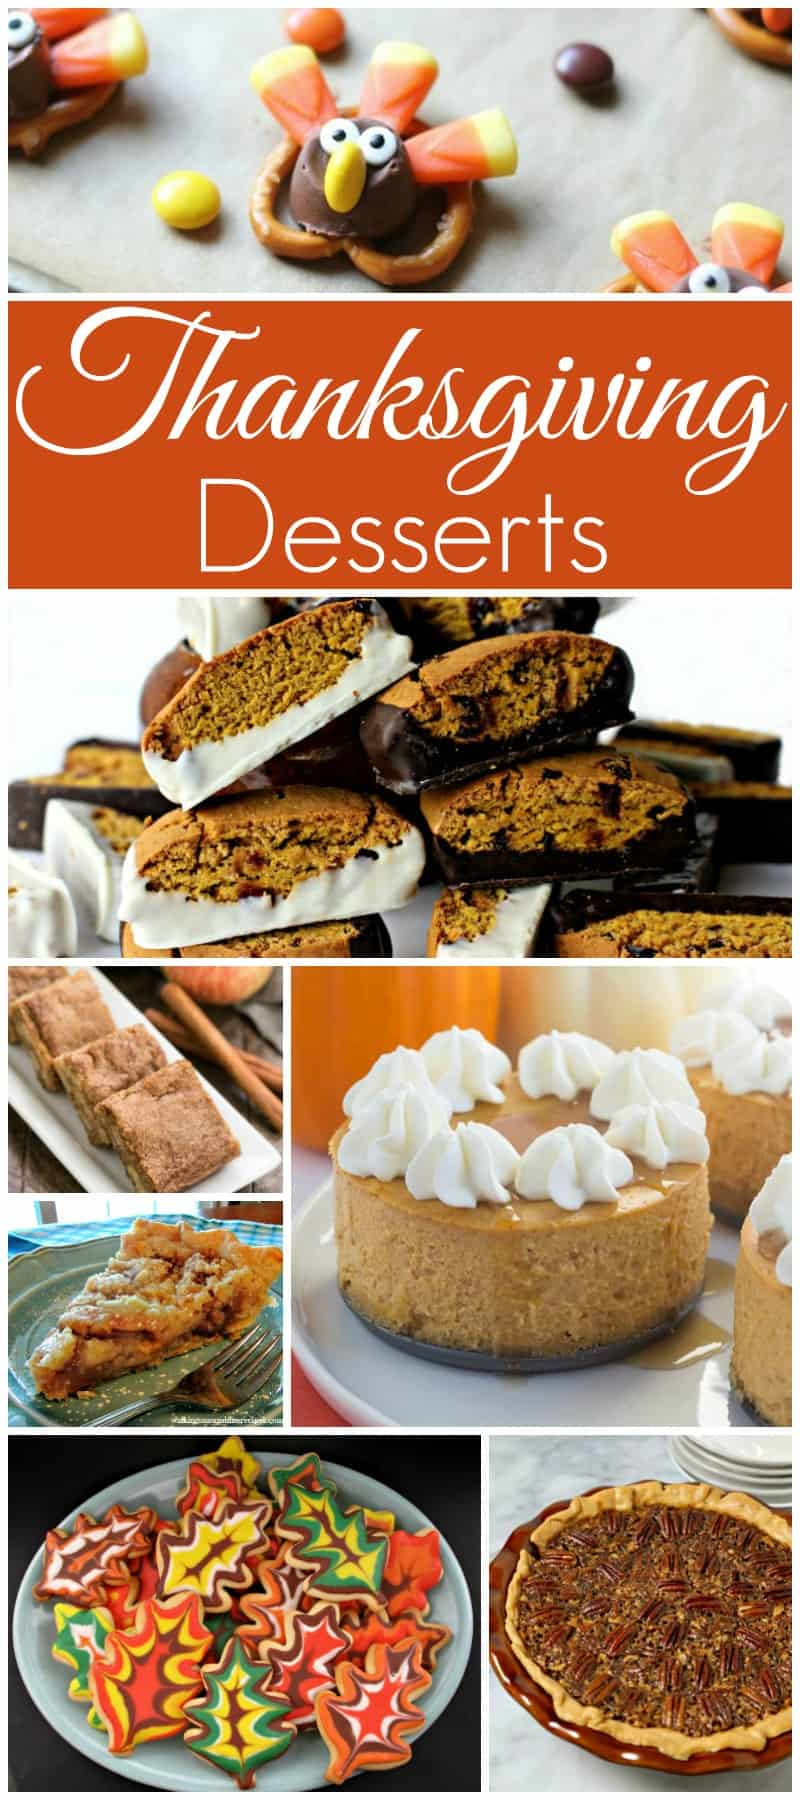 Thanksgiving Turkey Desserts
 Thanksgiving Desserts and our Delicious Dishes Recipe Party